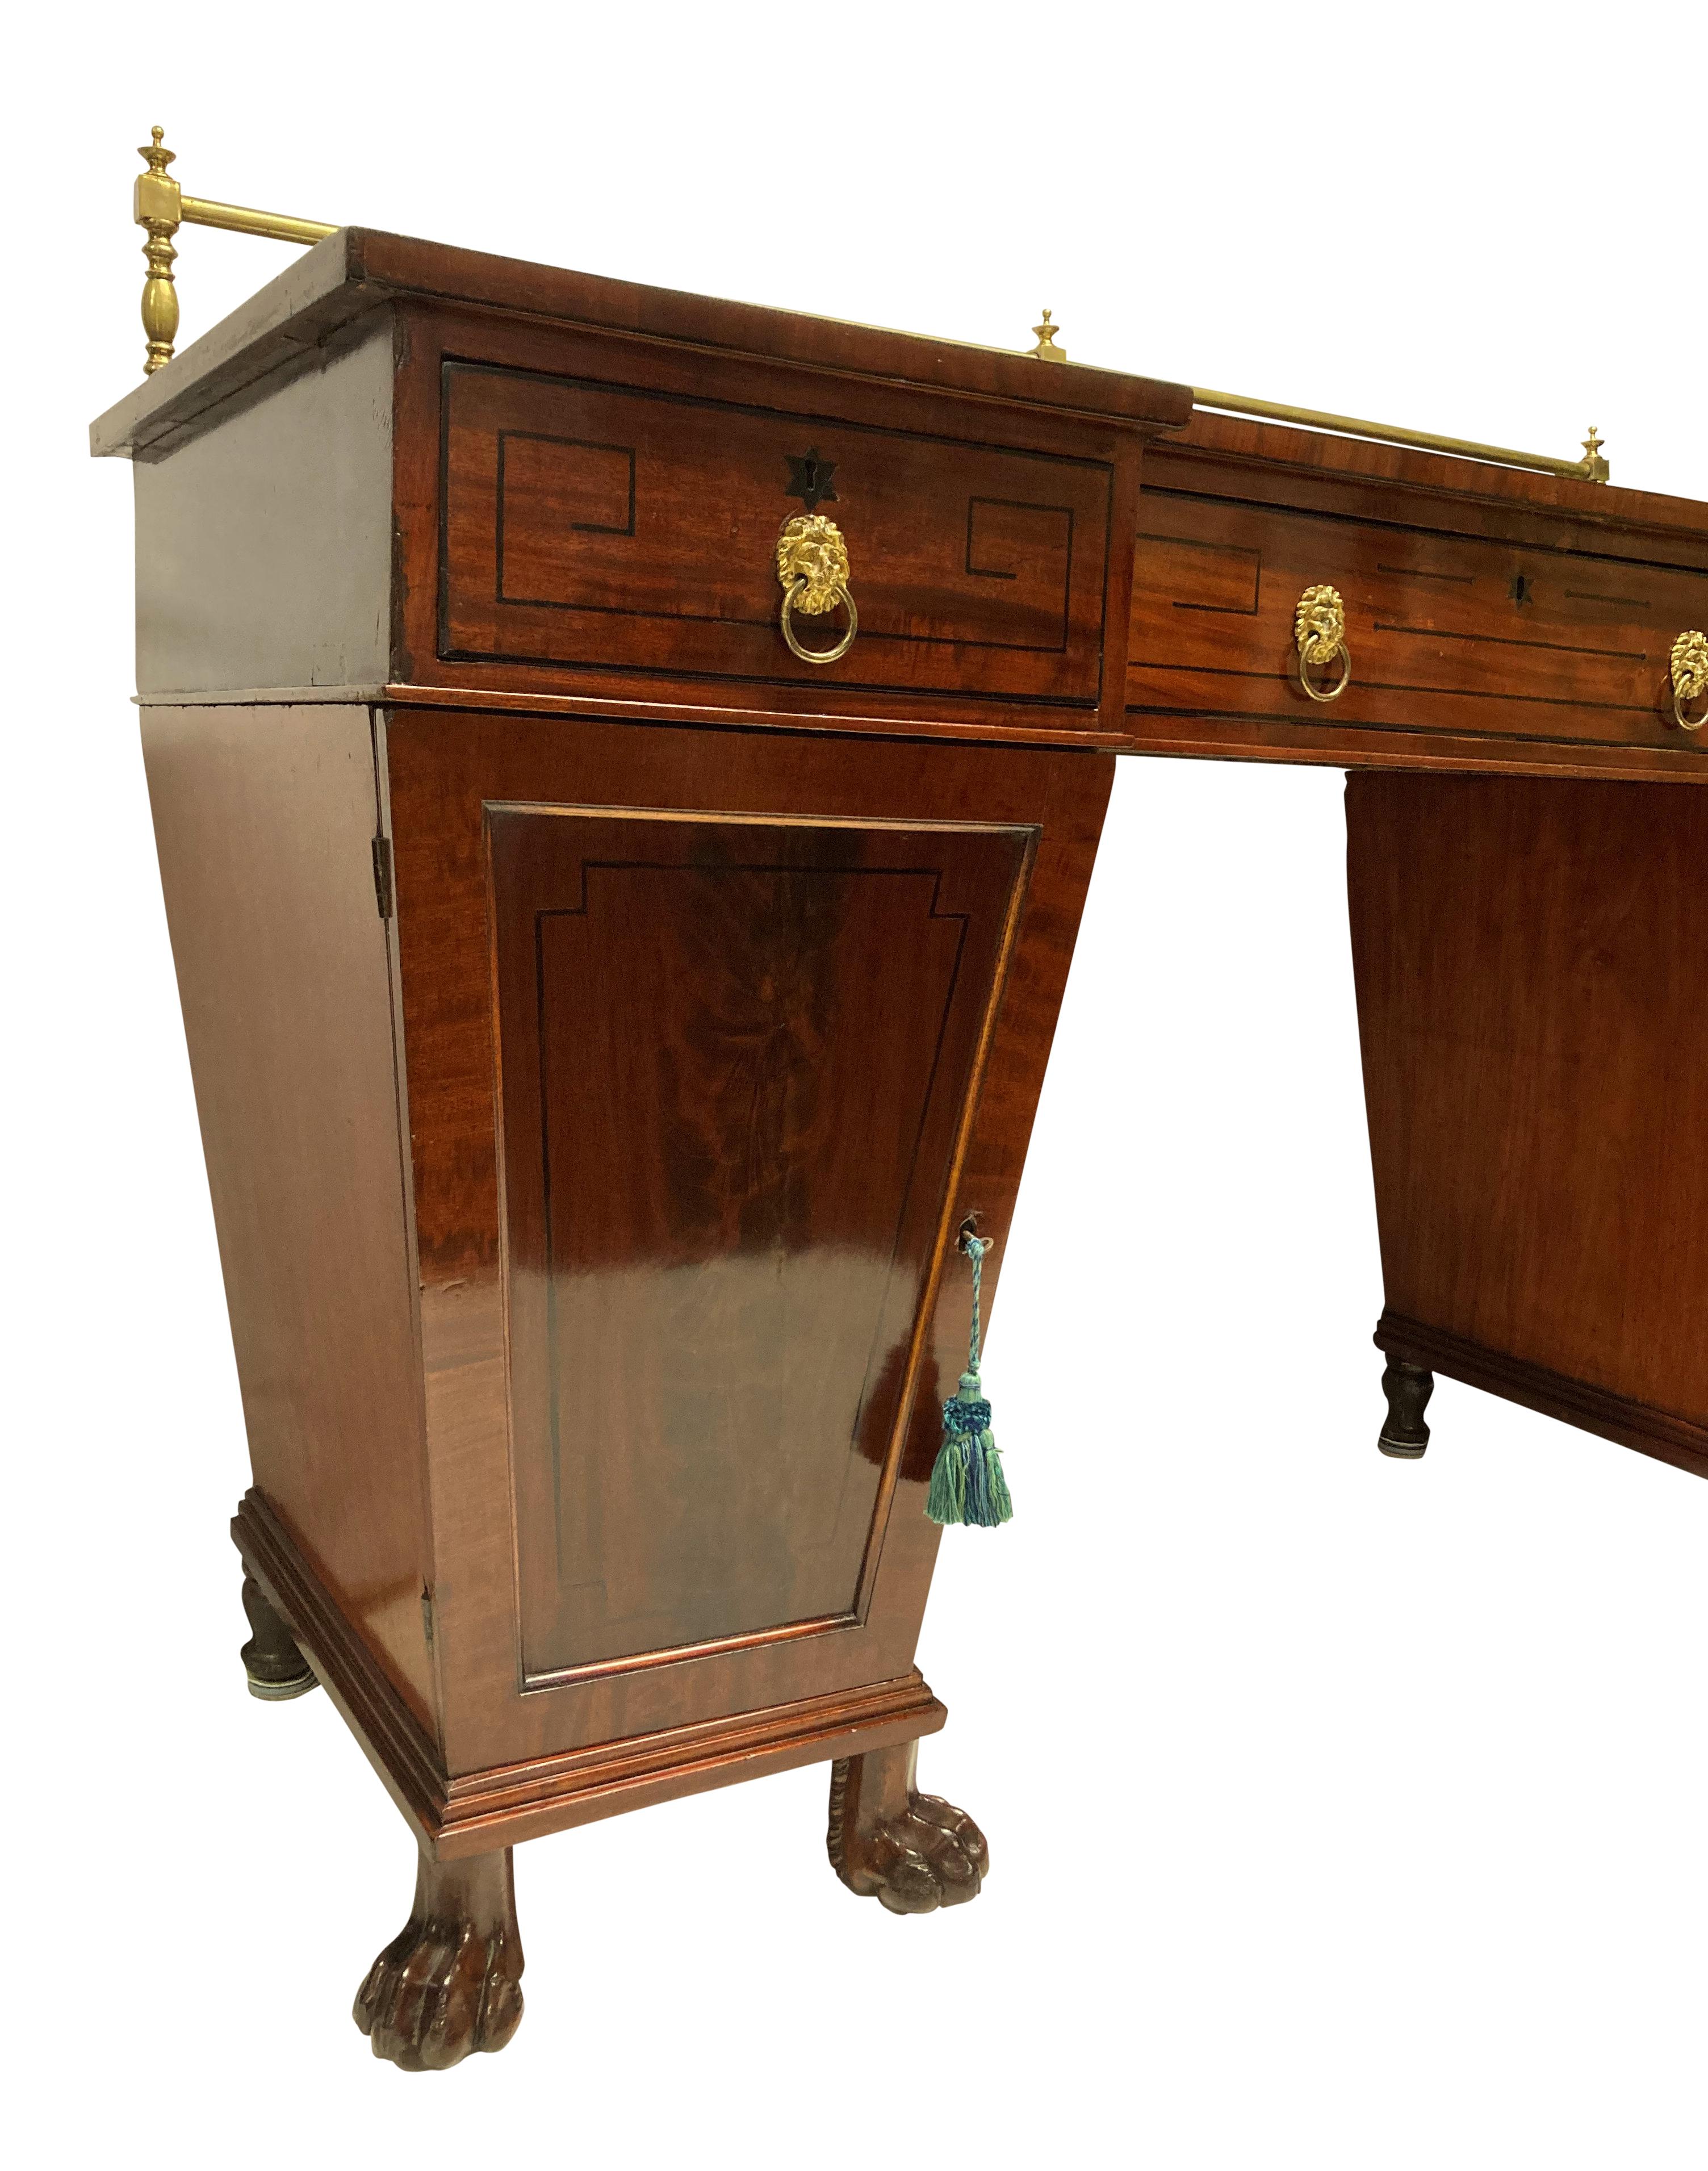 A Scottish Regency, mahogany twin pedestal sideboard with Neo-Classical ebony inlay in a Greek key design. With a brass gallery, drawers and twin cupboards, one containing a cellarette and on lion paw feet.